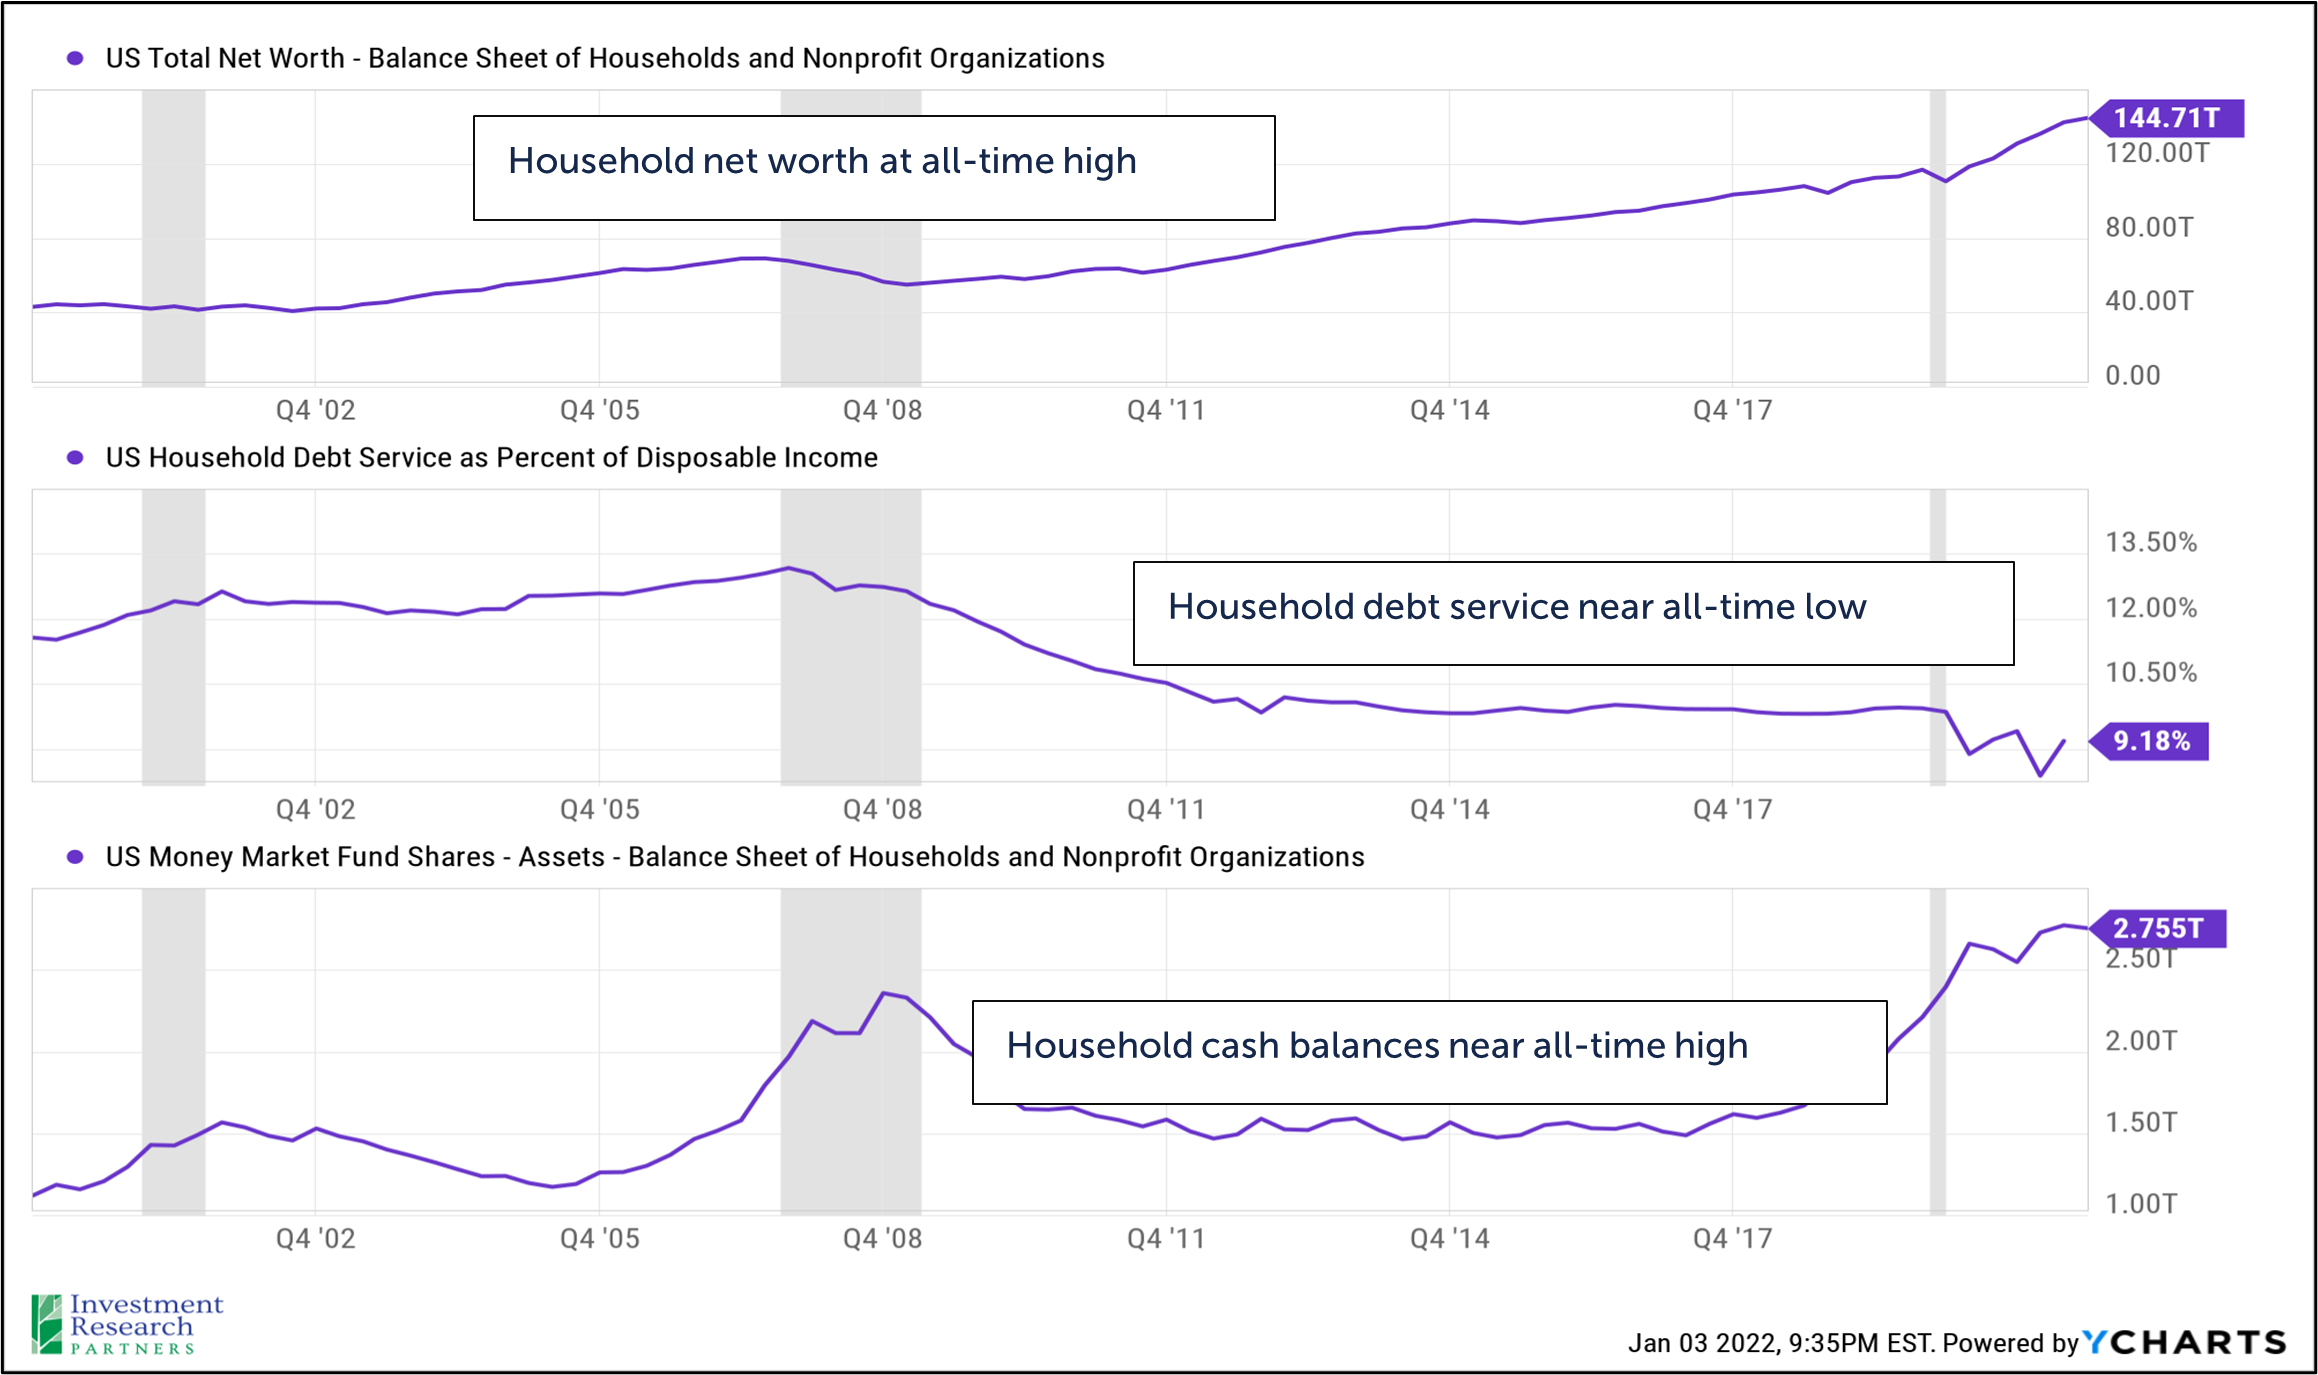 Line graphs depicting US Total Net Worth - Balance Sheet of Households and Nonprofit Organizations, US Household Debt Service as Percent of Disposable Income, and US Money Market Fund Shares - Assets - Balance Sheet of Households and Nonprofit Organizations